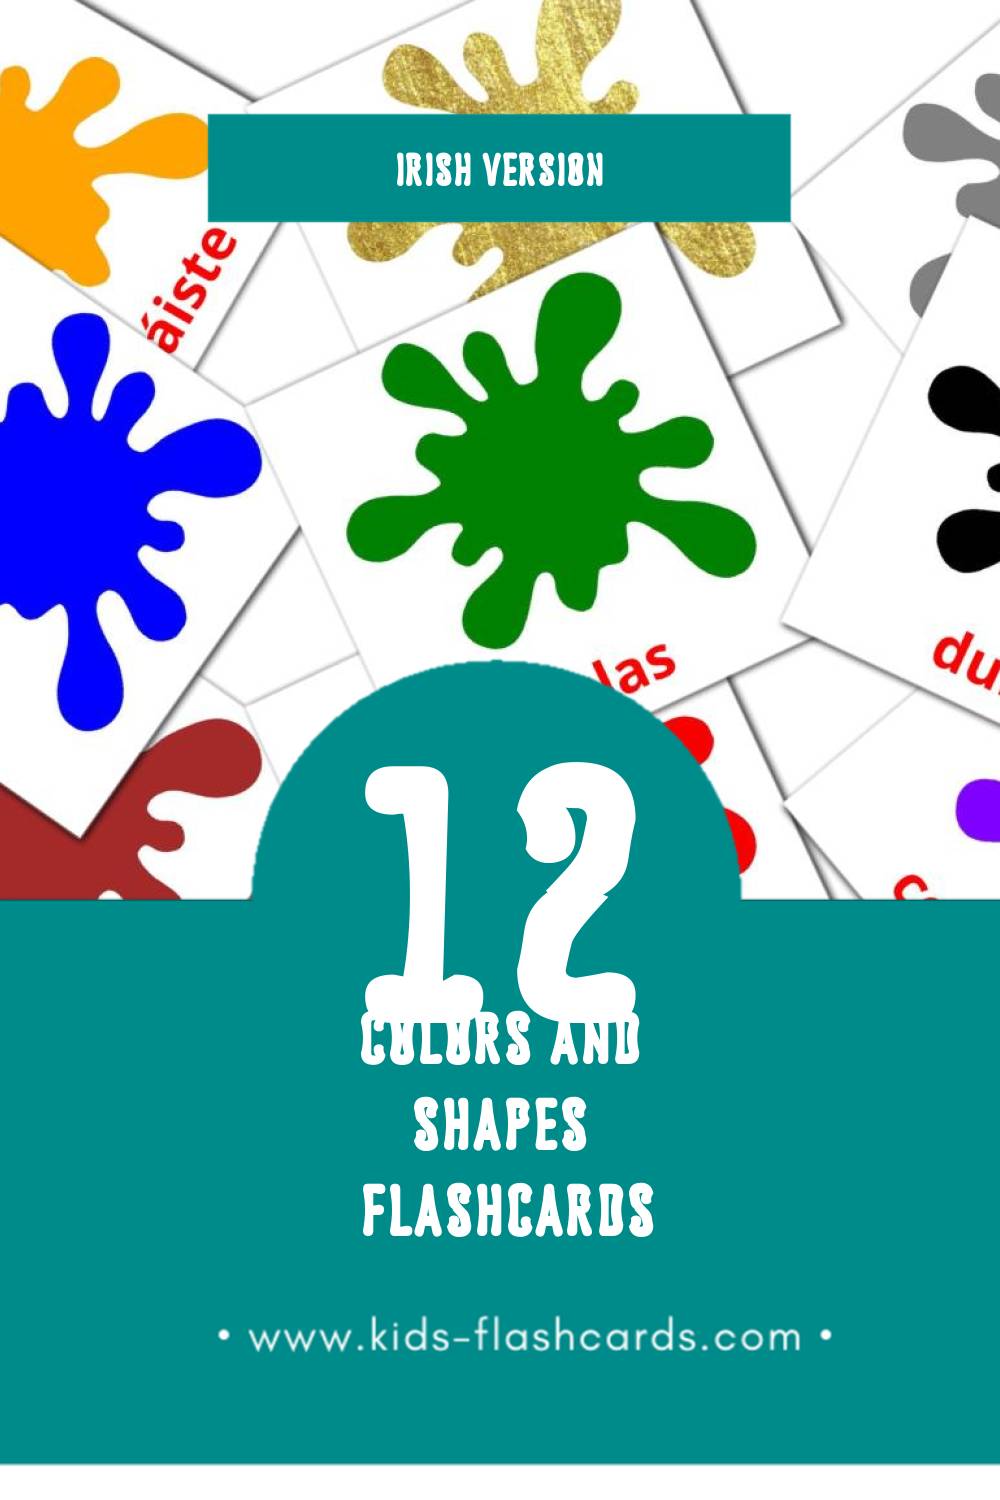 Visual dathanna agus cruthanna Flashcards for Toddlers (12 cards in Irish)